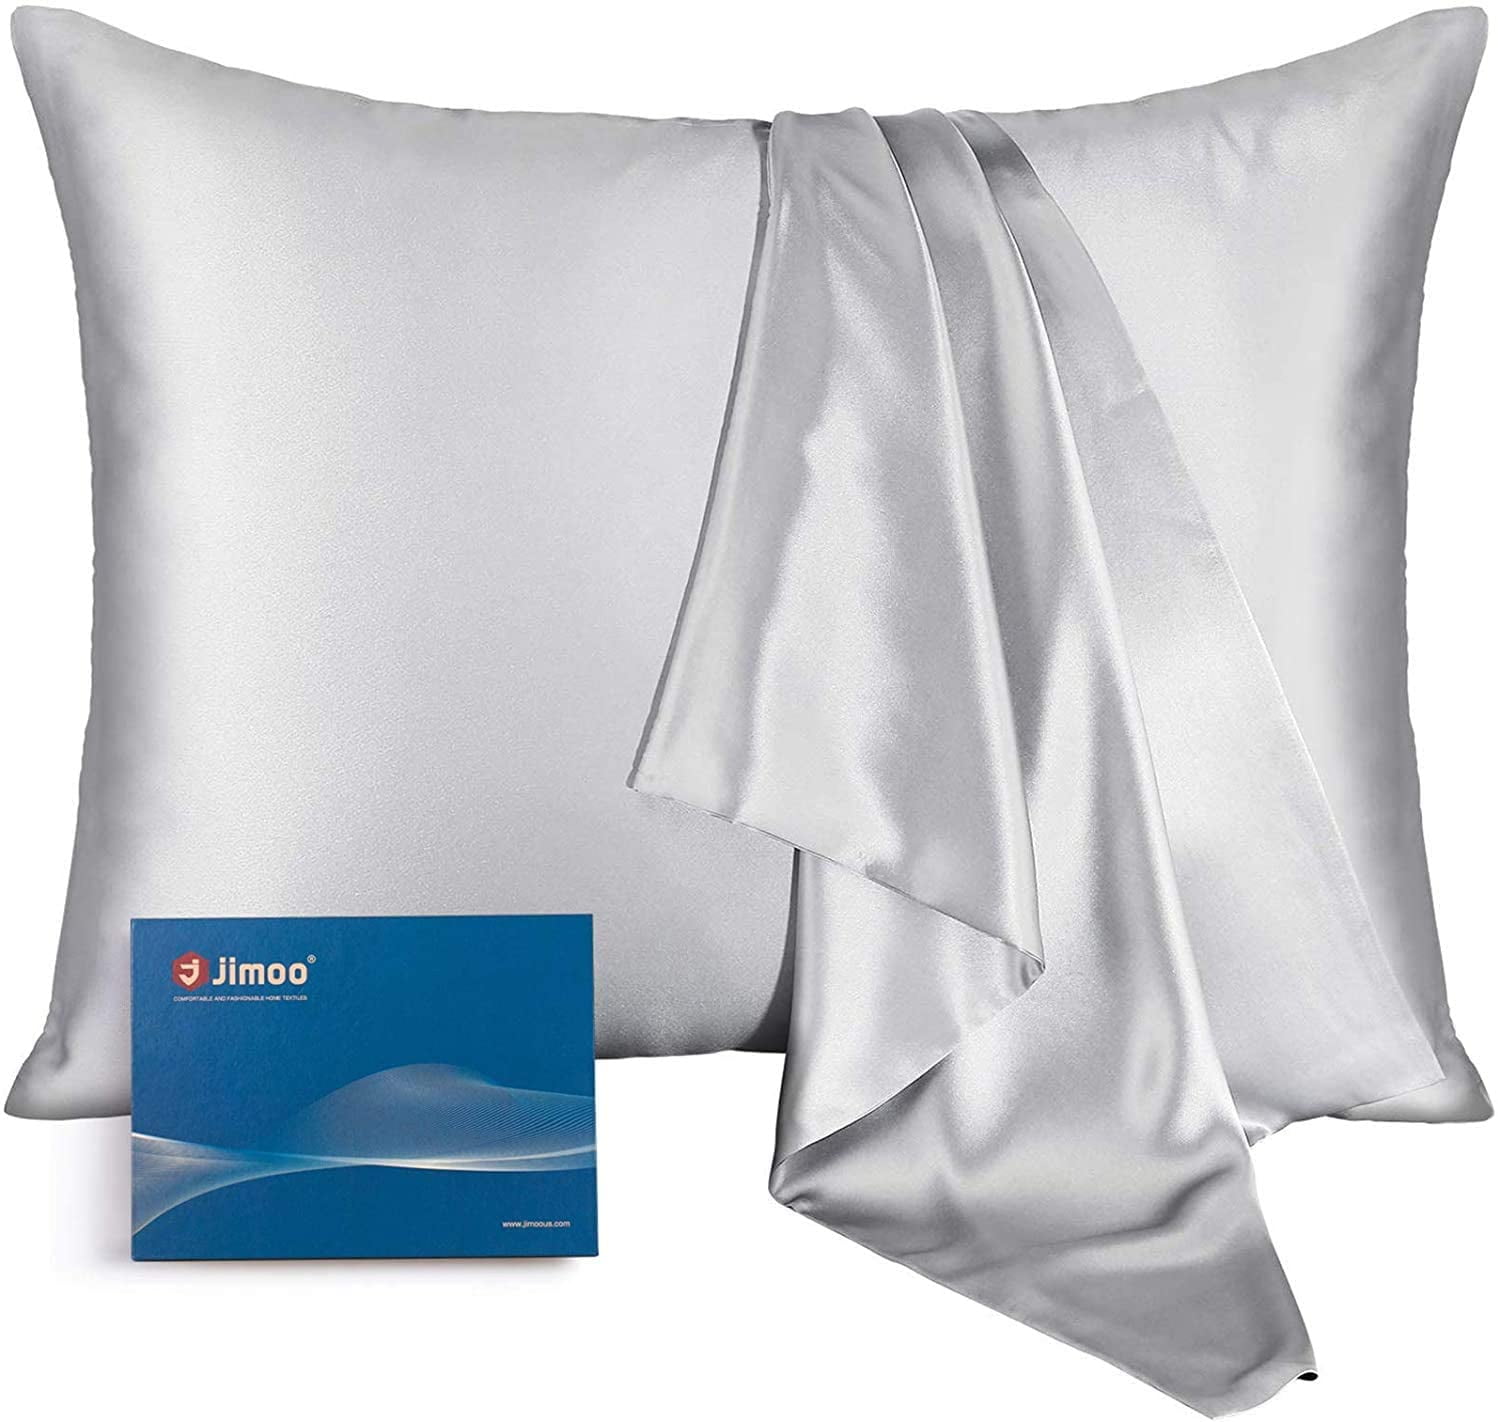 Details about   Natural Silk Pillowcase for Hair and Skin with Hidden Zipper,22 Momme,600 Threa 